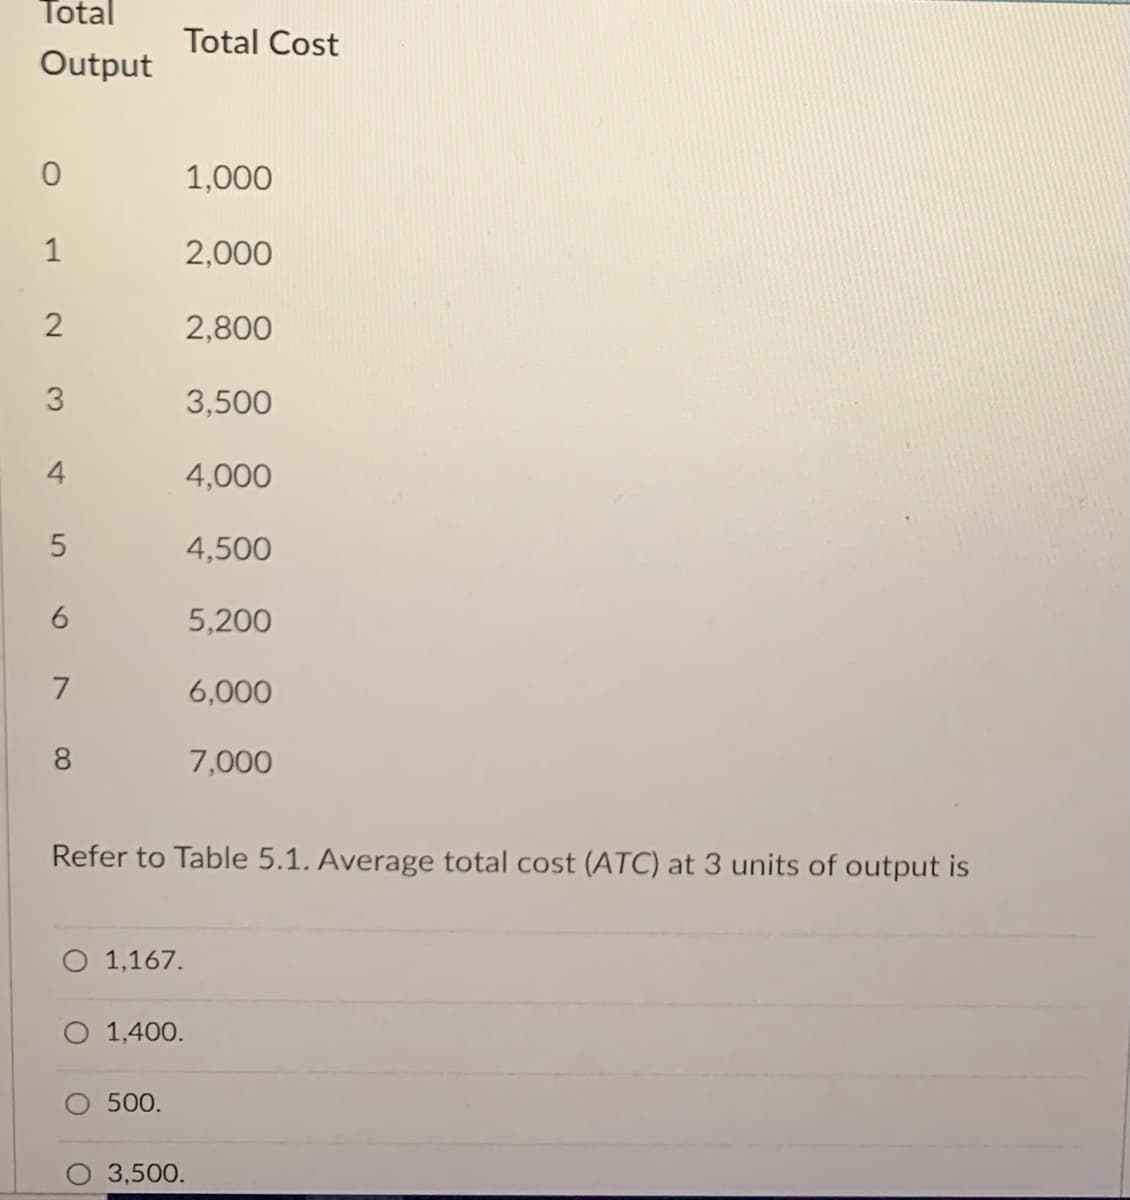 Total
Total Cost
Output
1,000
1
2,000
2,800
3,500
4
4,000
4,500
5,200
7
6,000
8.
7,000
Refer to Table 5.1. Average total cost (ATC) at 3 units of output is
O 1,167.
1,400.
O 500.
3,500.
